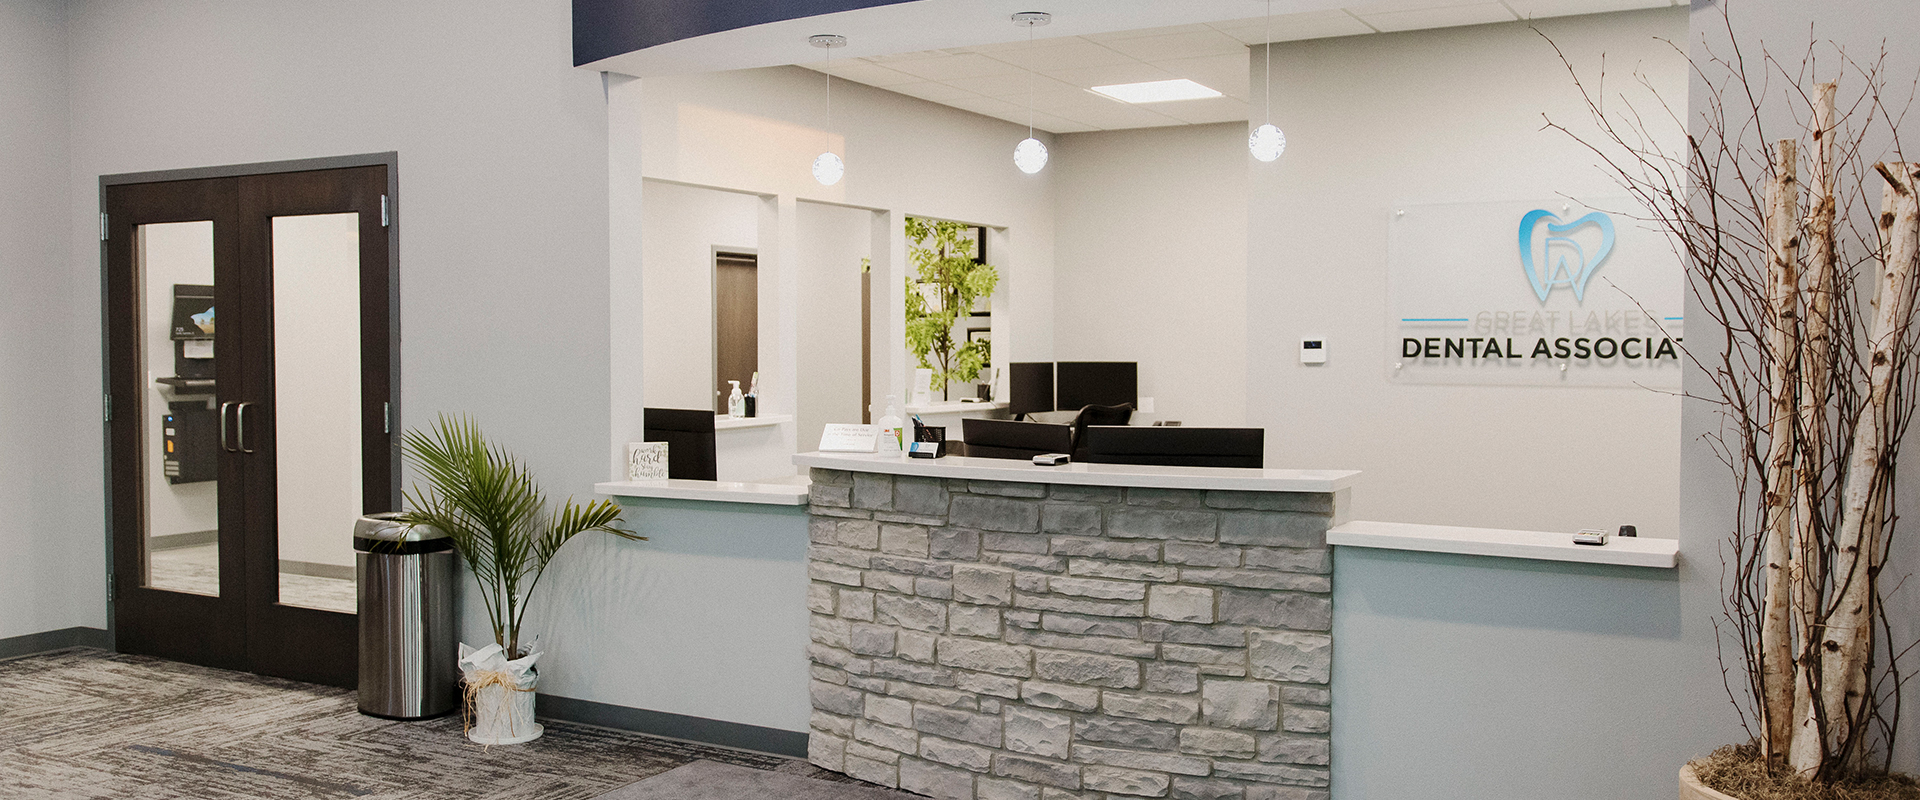 Great Lakes Dental Associates is proud to provide the highest quality dental care to all of our patients.